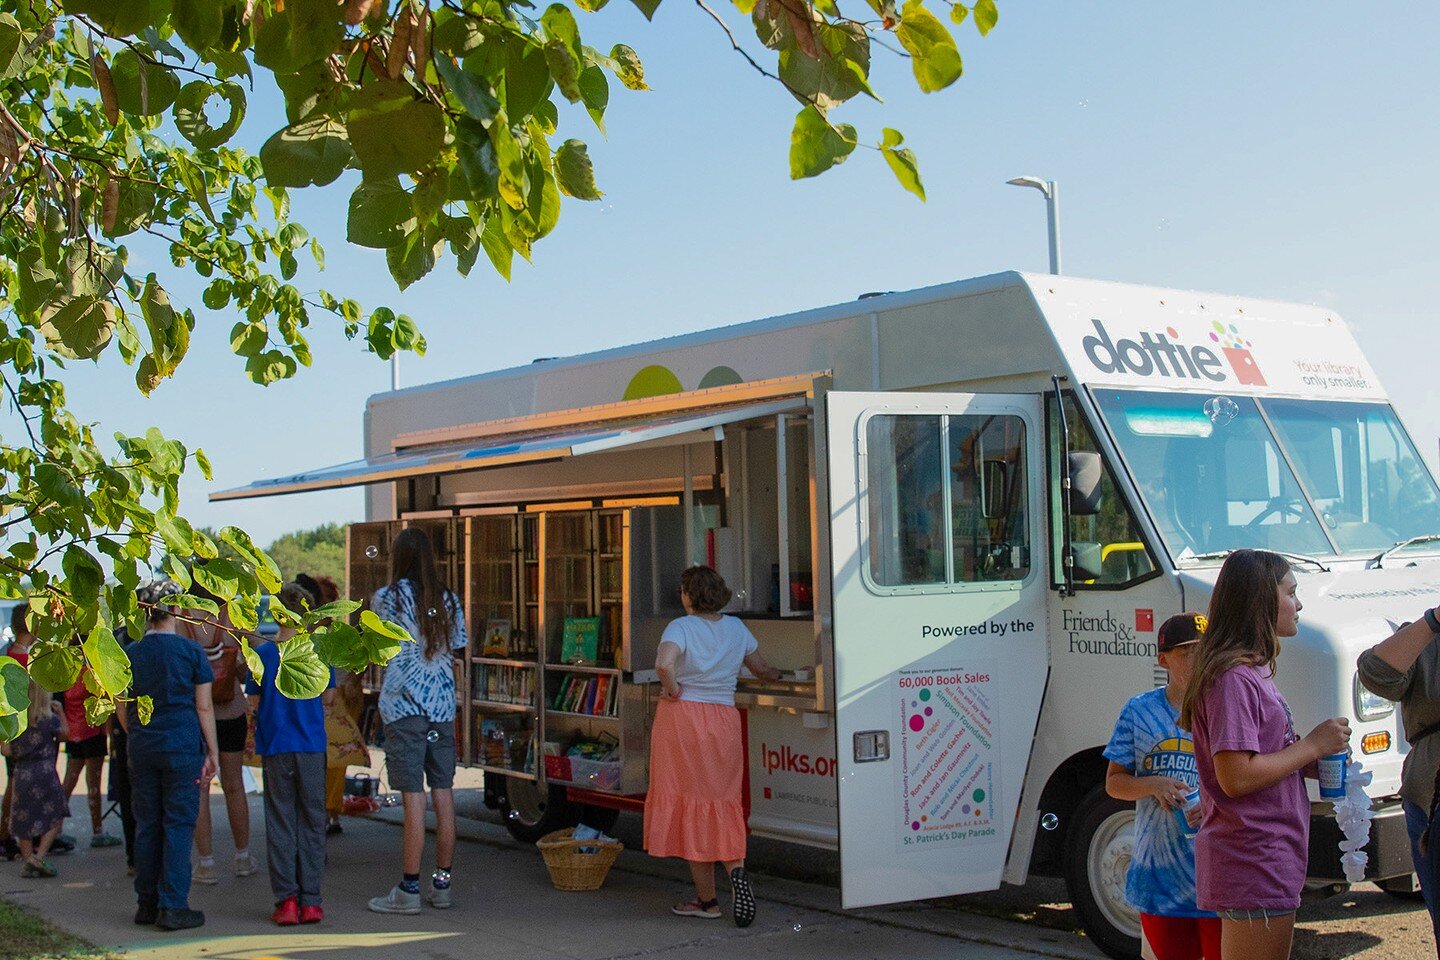 @lawrencelibrary mobile library moments 🤍🚛🫧

Image 1: Dottie is parked in front of Billy Mills Middle School, proudly displaying books.

Image 2: A Library staff member hands out prizes to two children. Bubbles are highlighted by the sun.

Image 3